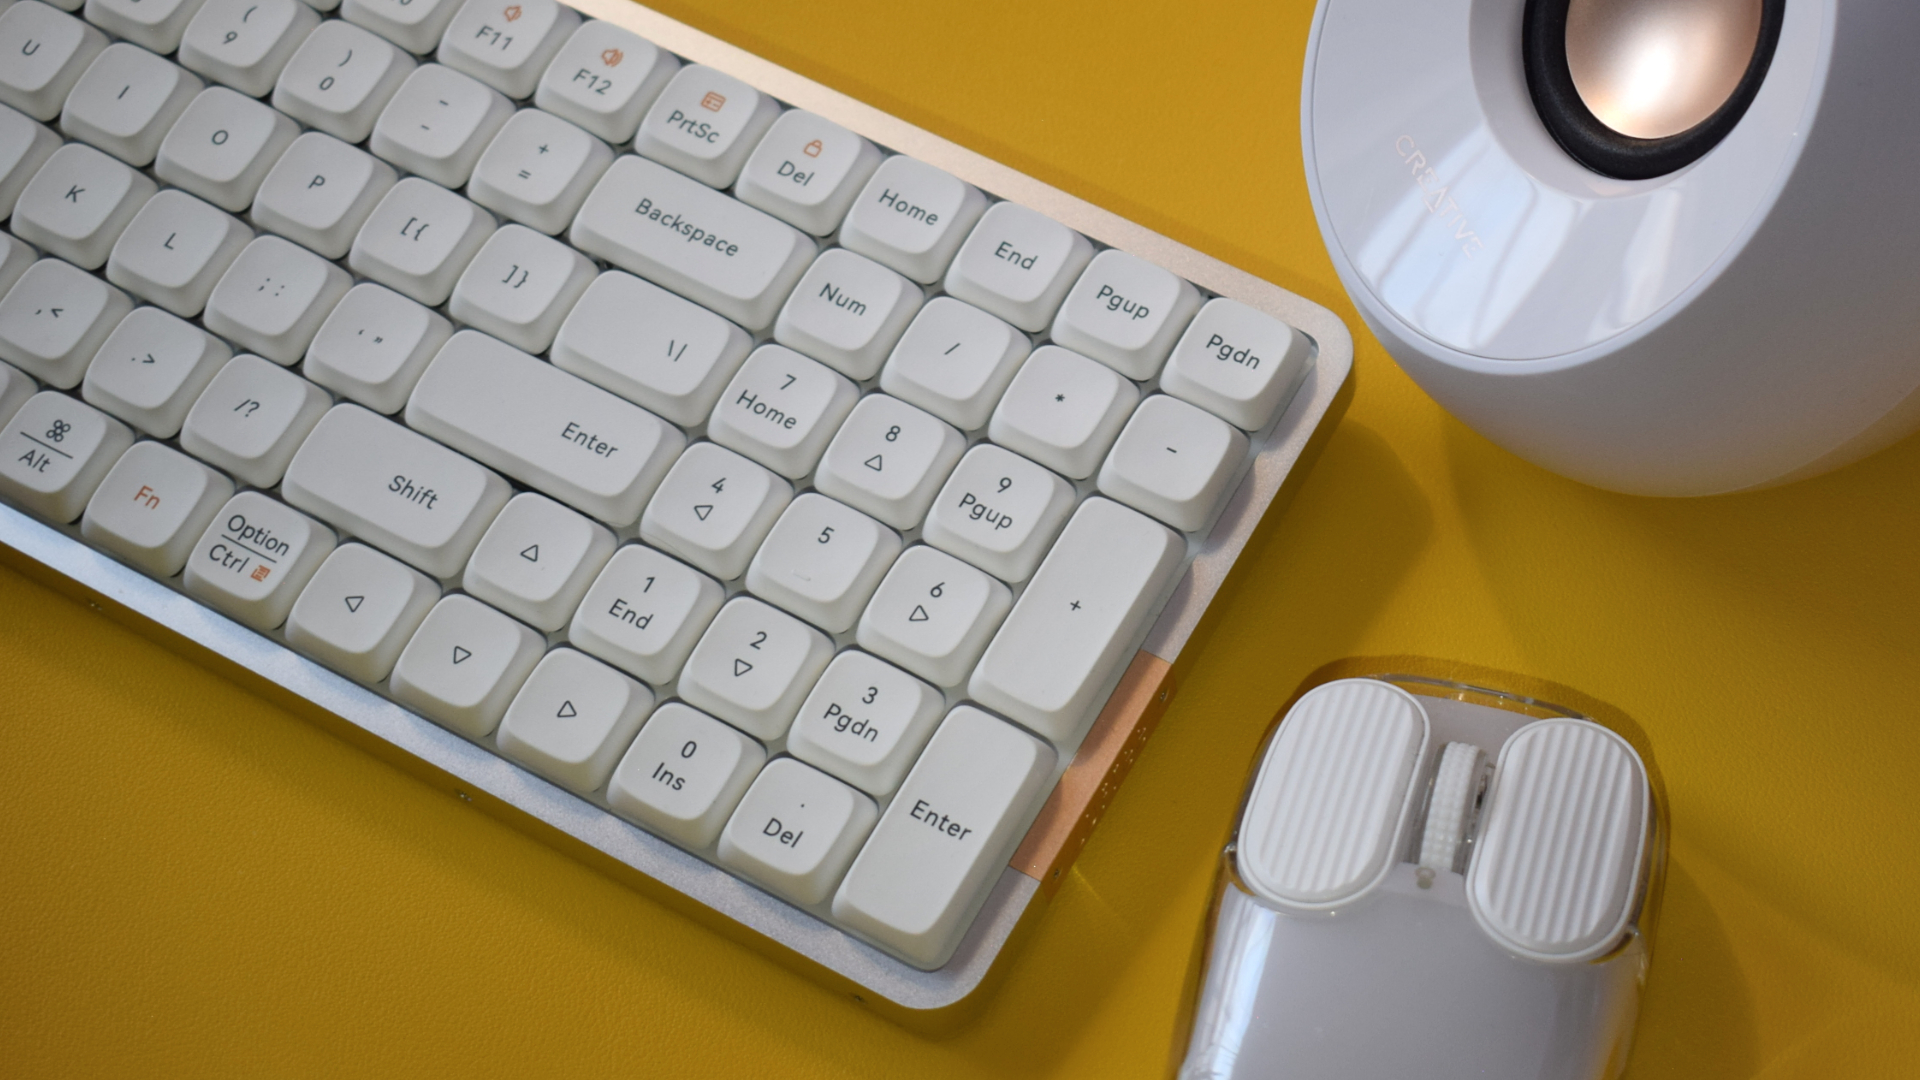 Lofree Flow mechanical wireless keyboard photograph showing number pad